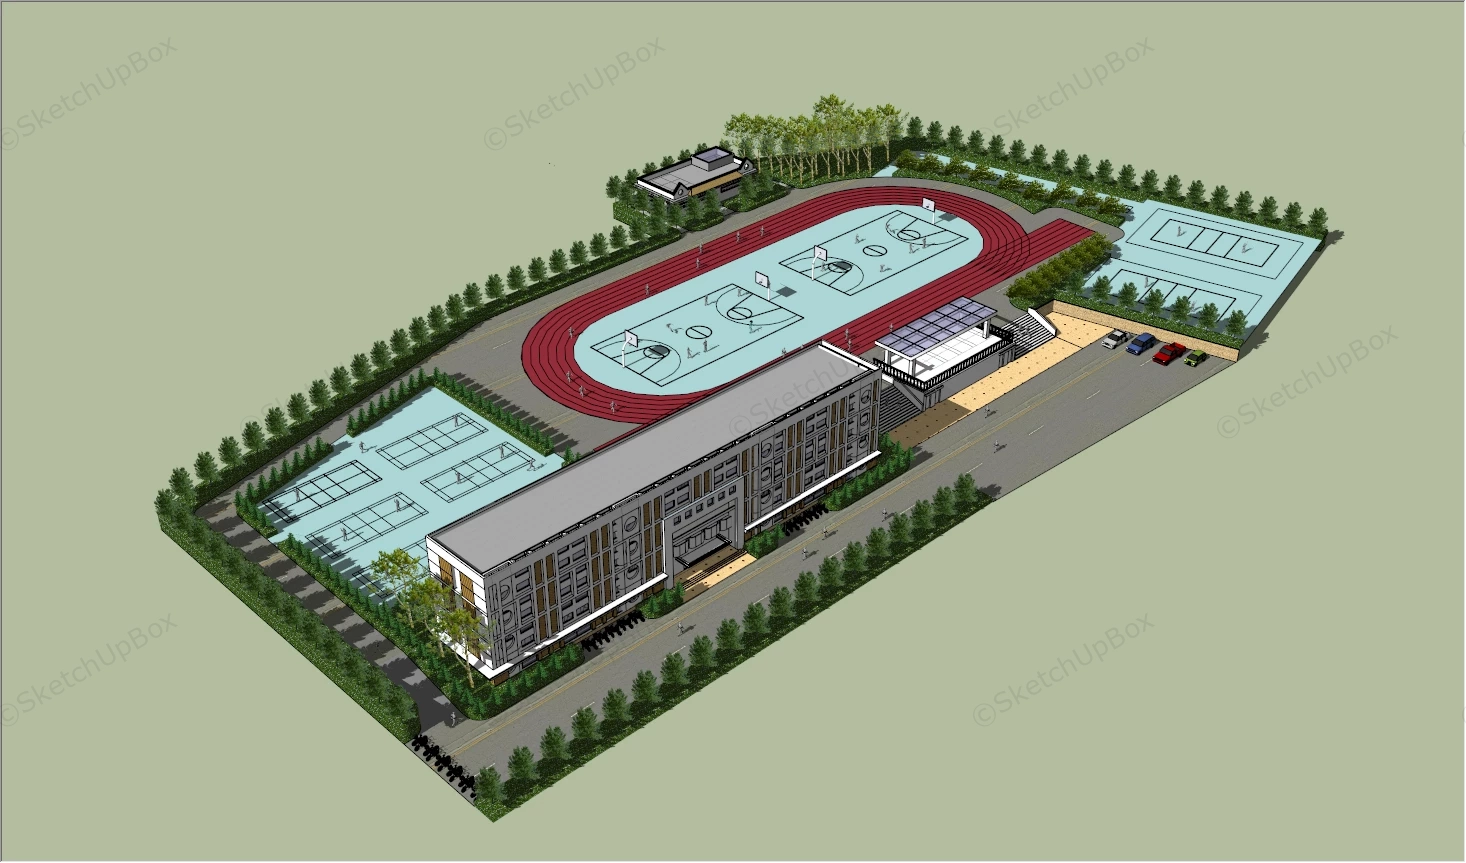 School Building And Athletic Fields sketchup model preview - SketchupBox